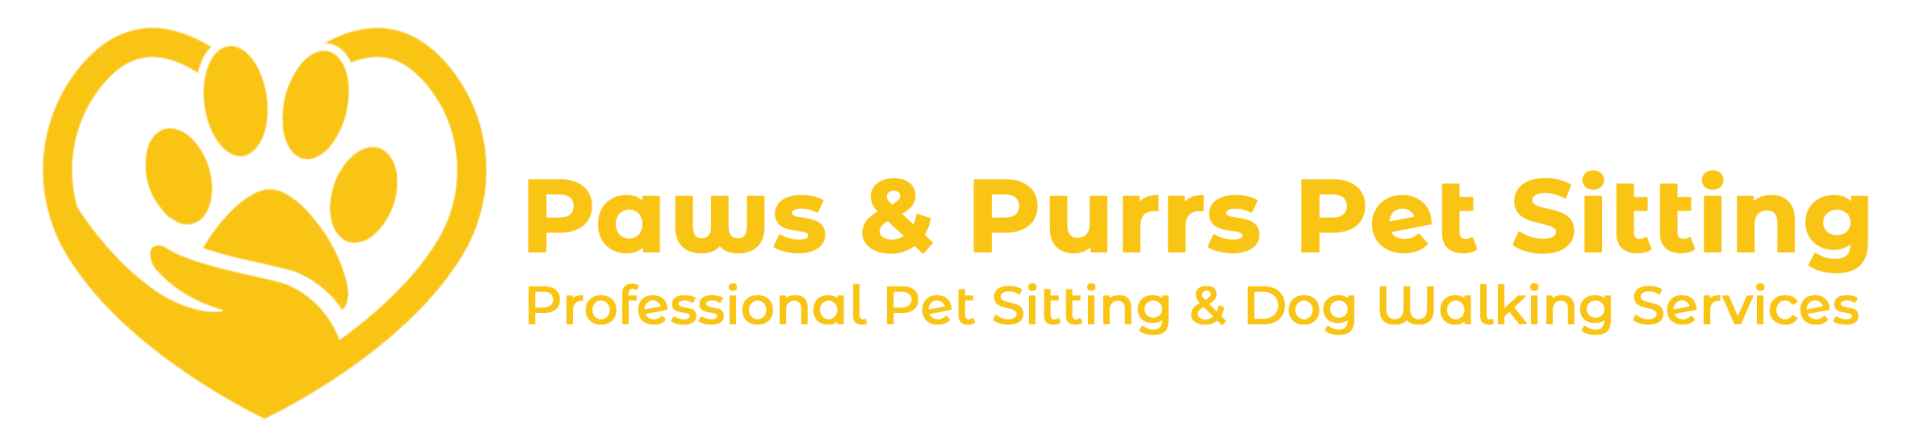 Paws & Purrs Pet Sitting